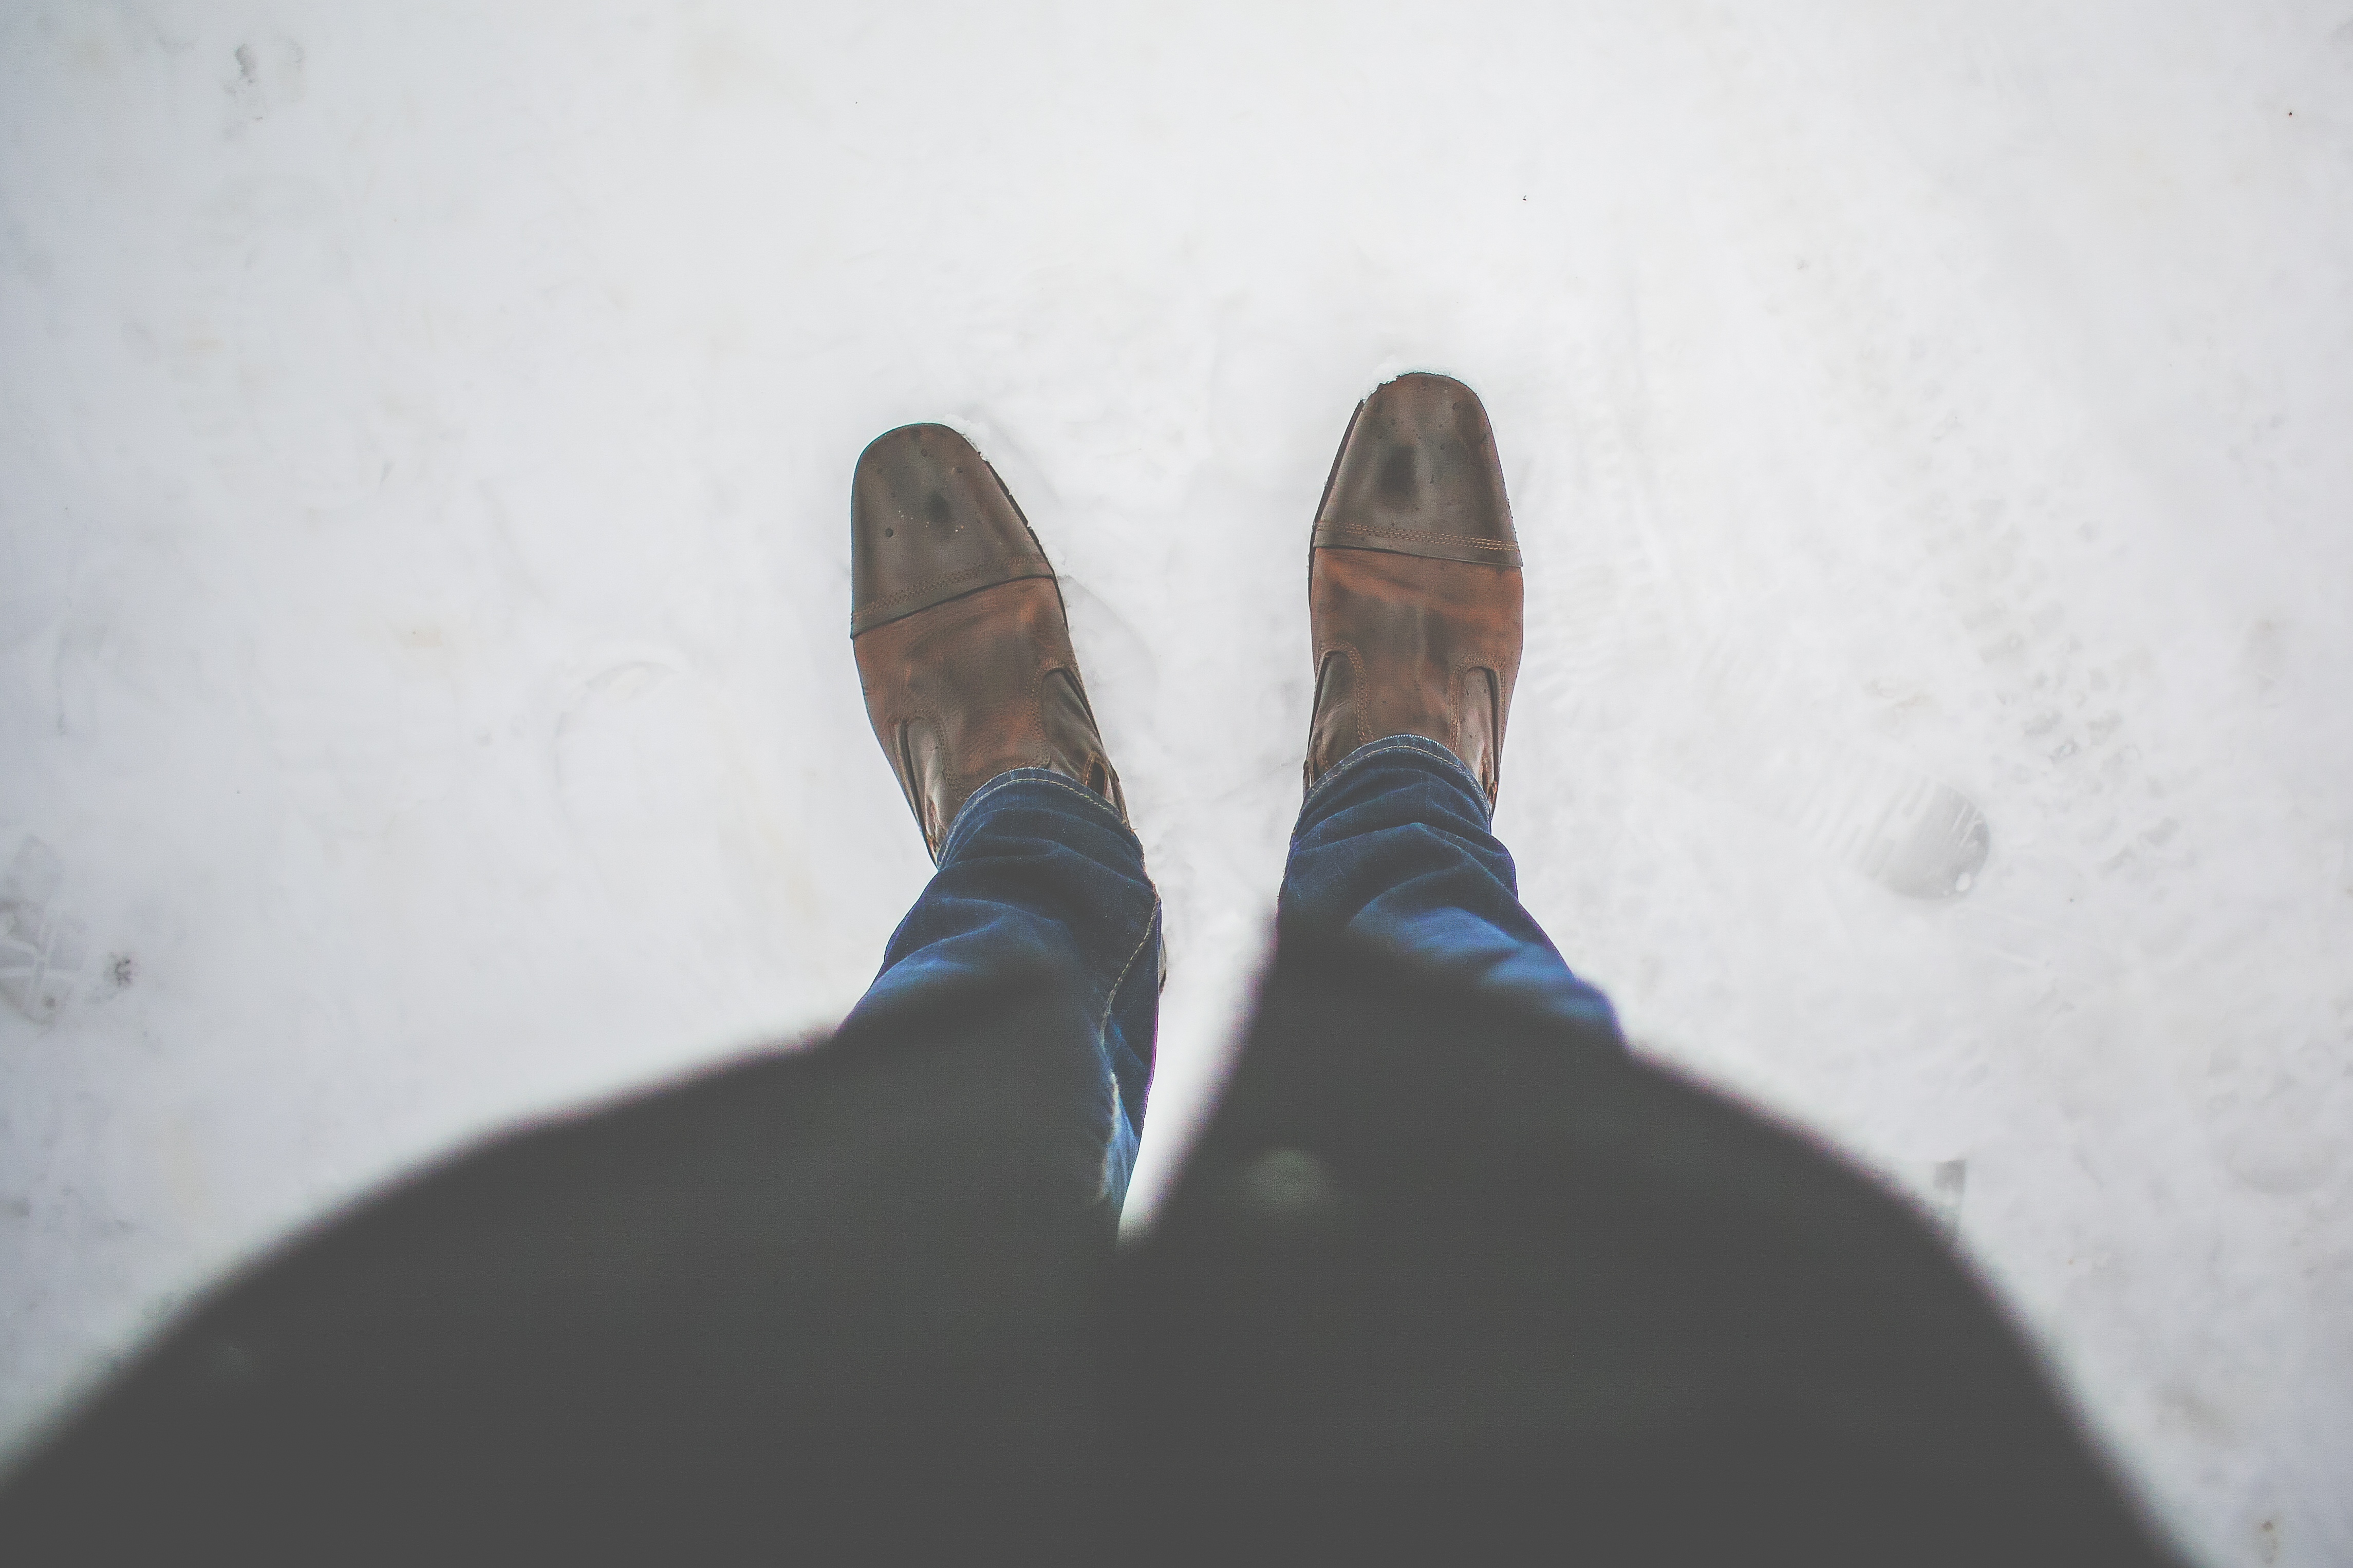 Man in leather boots standing in snow.  Bird's eye prospective of bottom half.